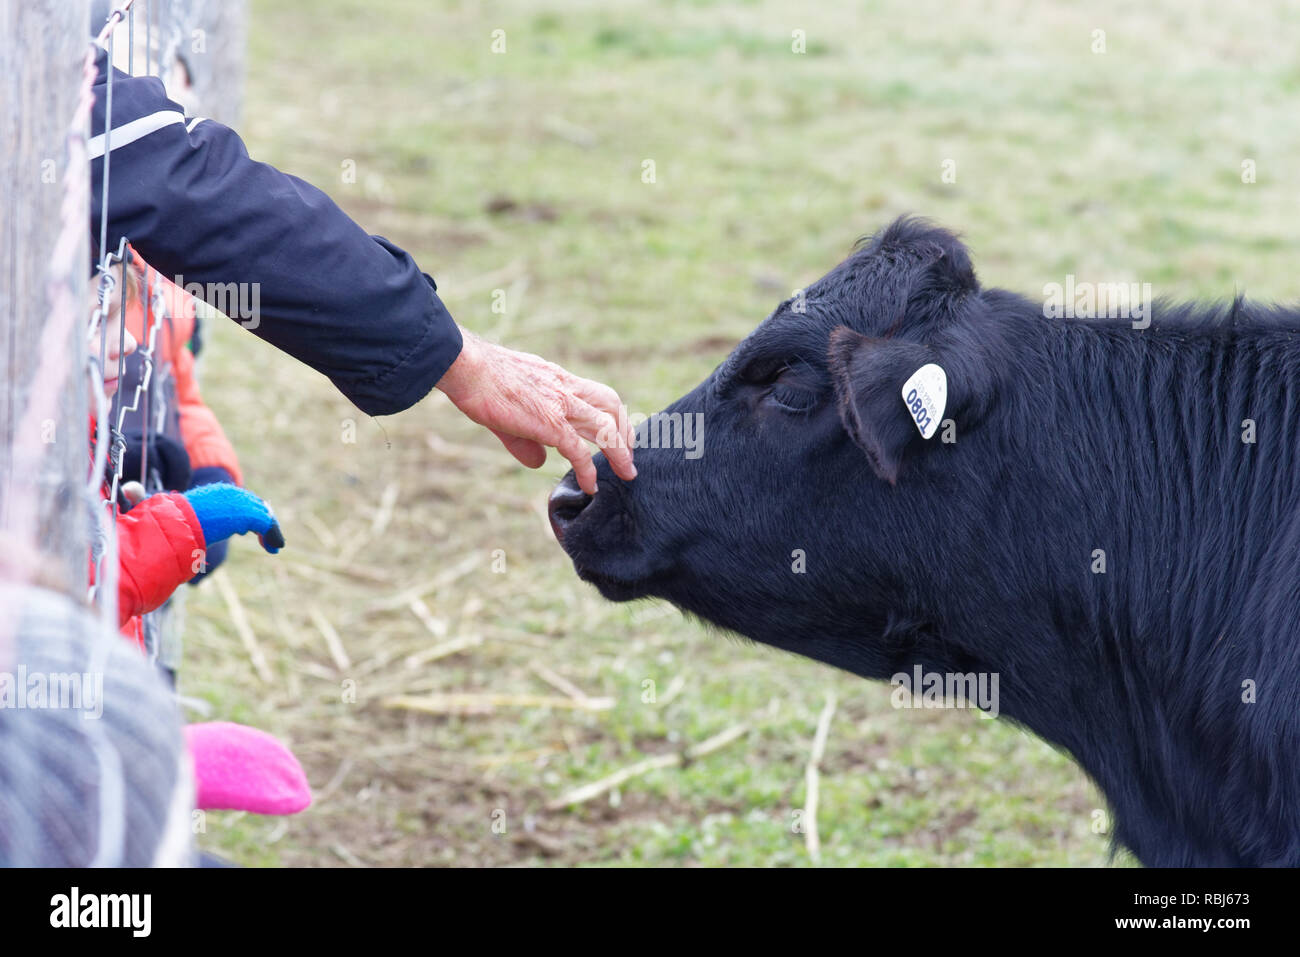 An elderly man's hand reaching through a wire fence to stroke a calf's nose on a farm in Quebec Stock Photo